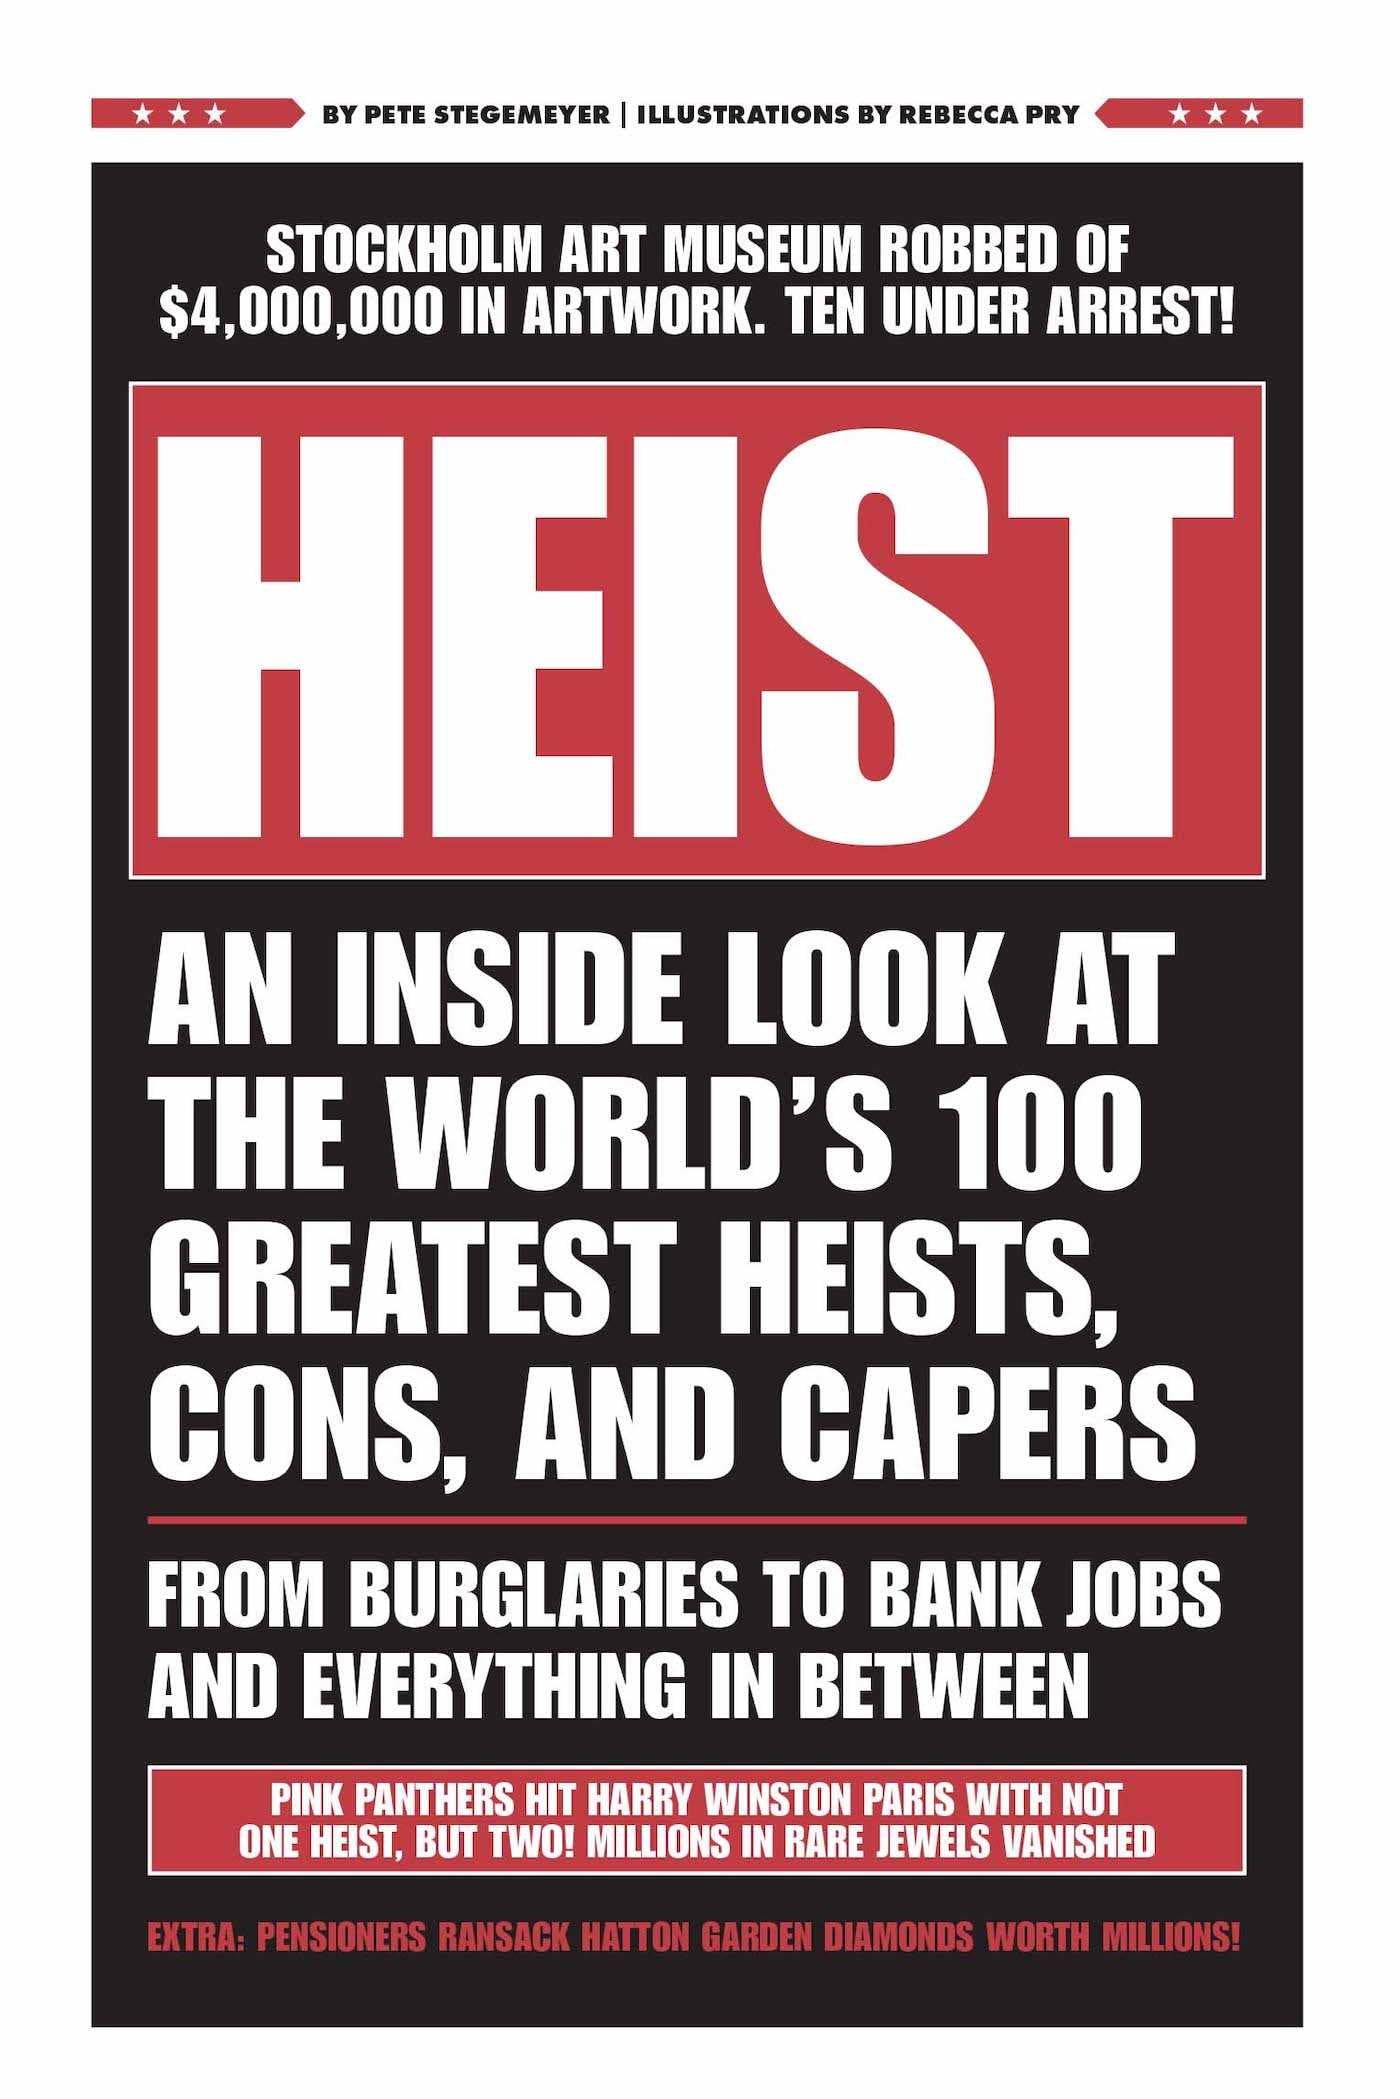 HEIST: An Inside Look at the World's 100 Greatest Heists, Cons, and Capers (From Burglaries to Bank Jobs and Everything In-Between)